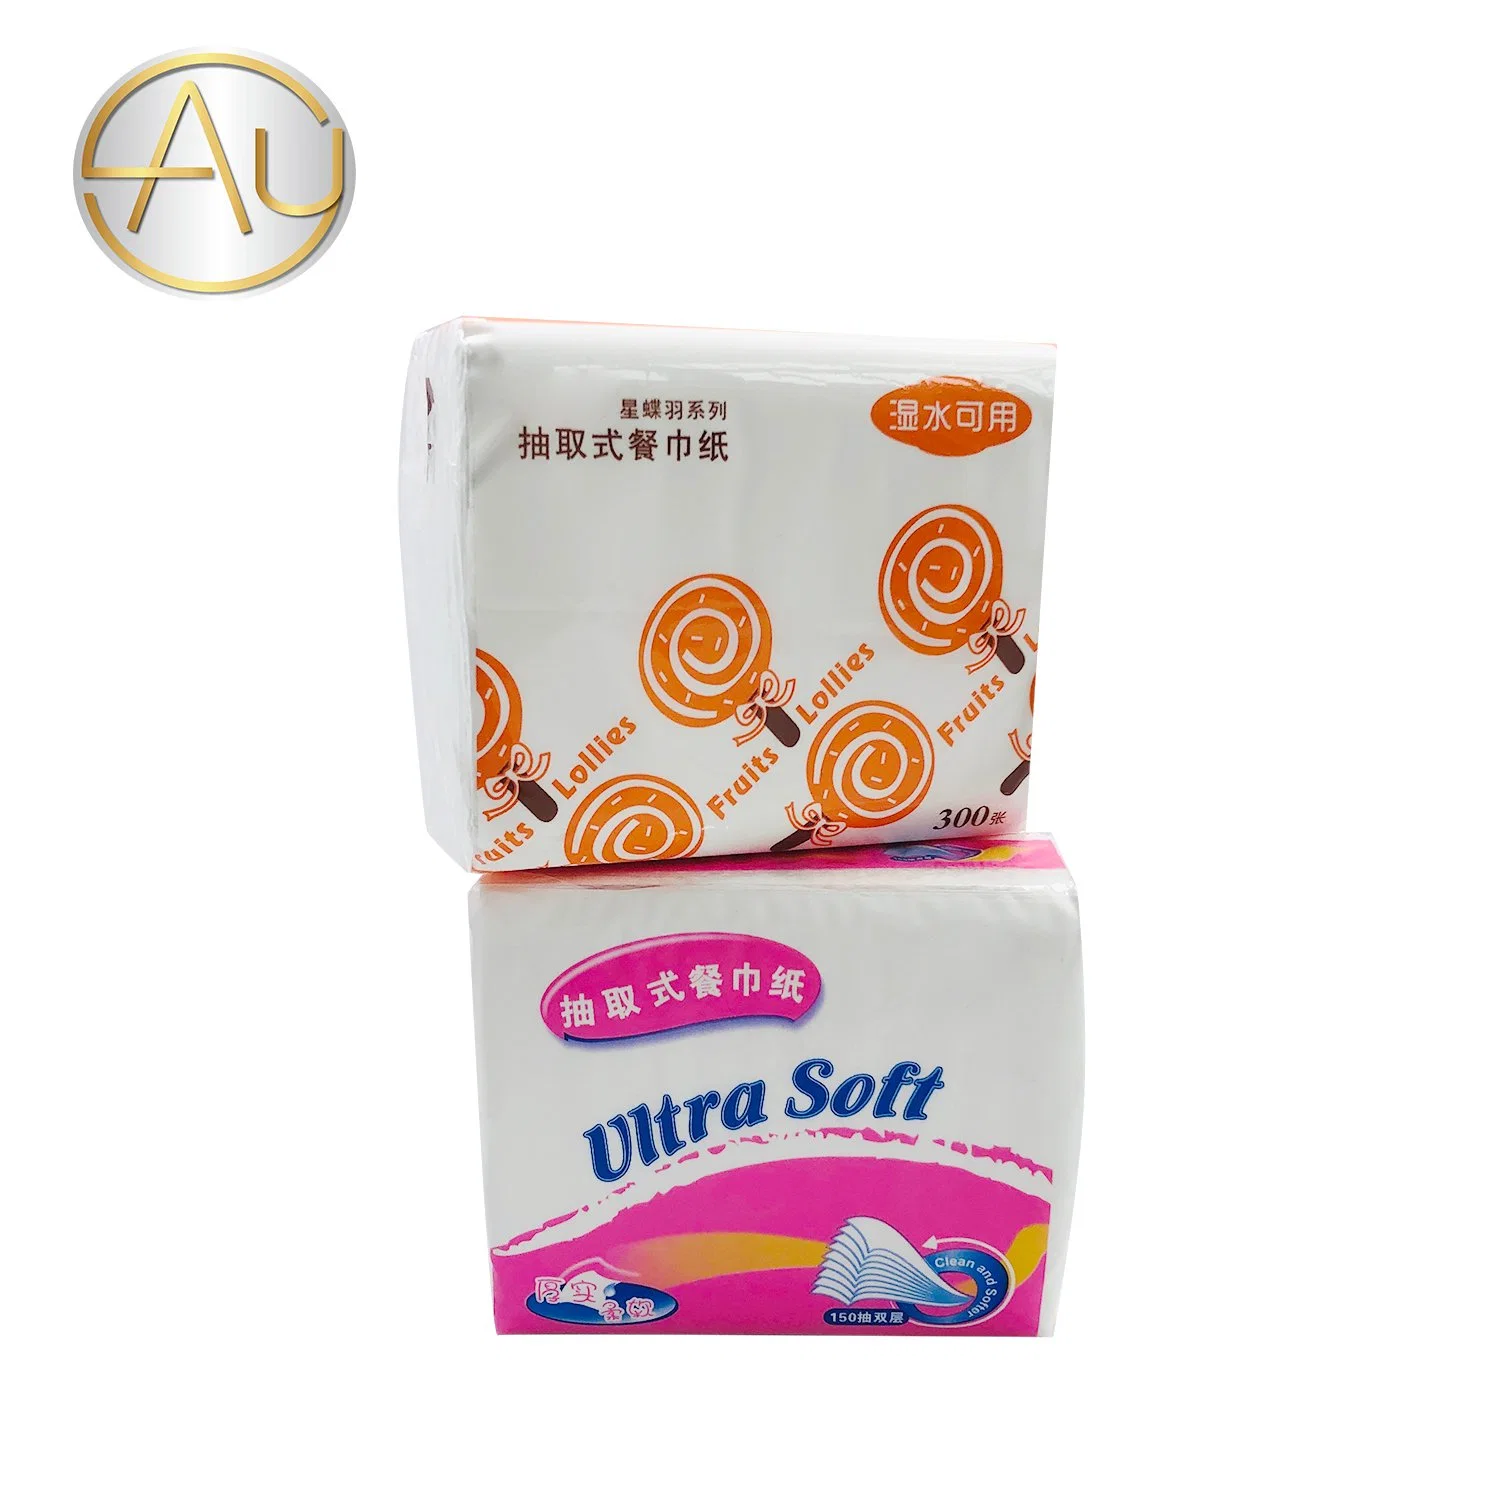 High quality/High cost performance  Chinese White Soft Nakin Party Facial Tissue